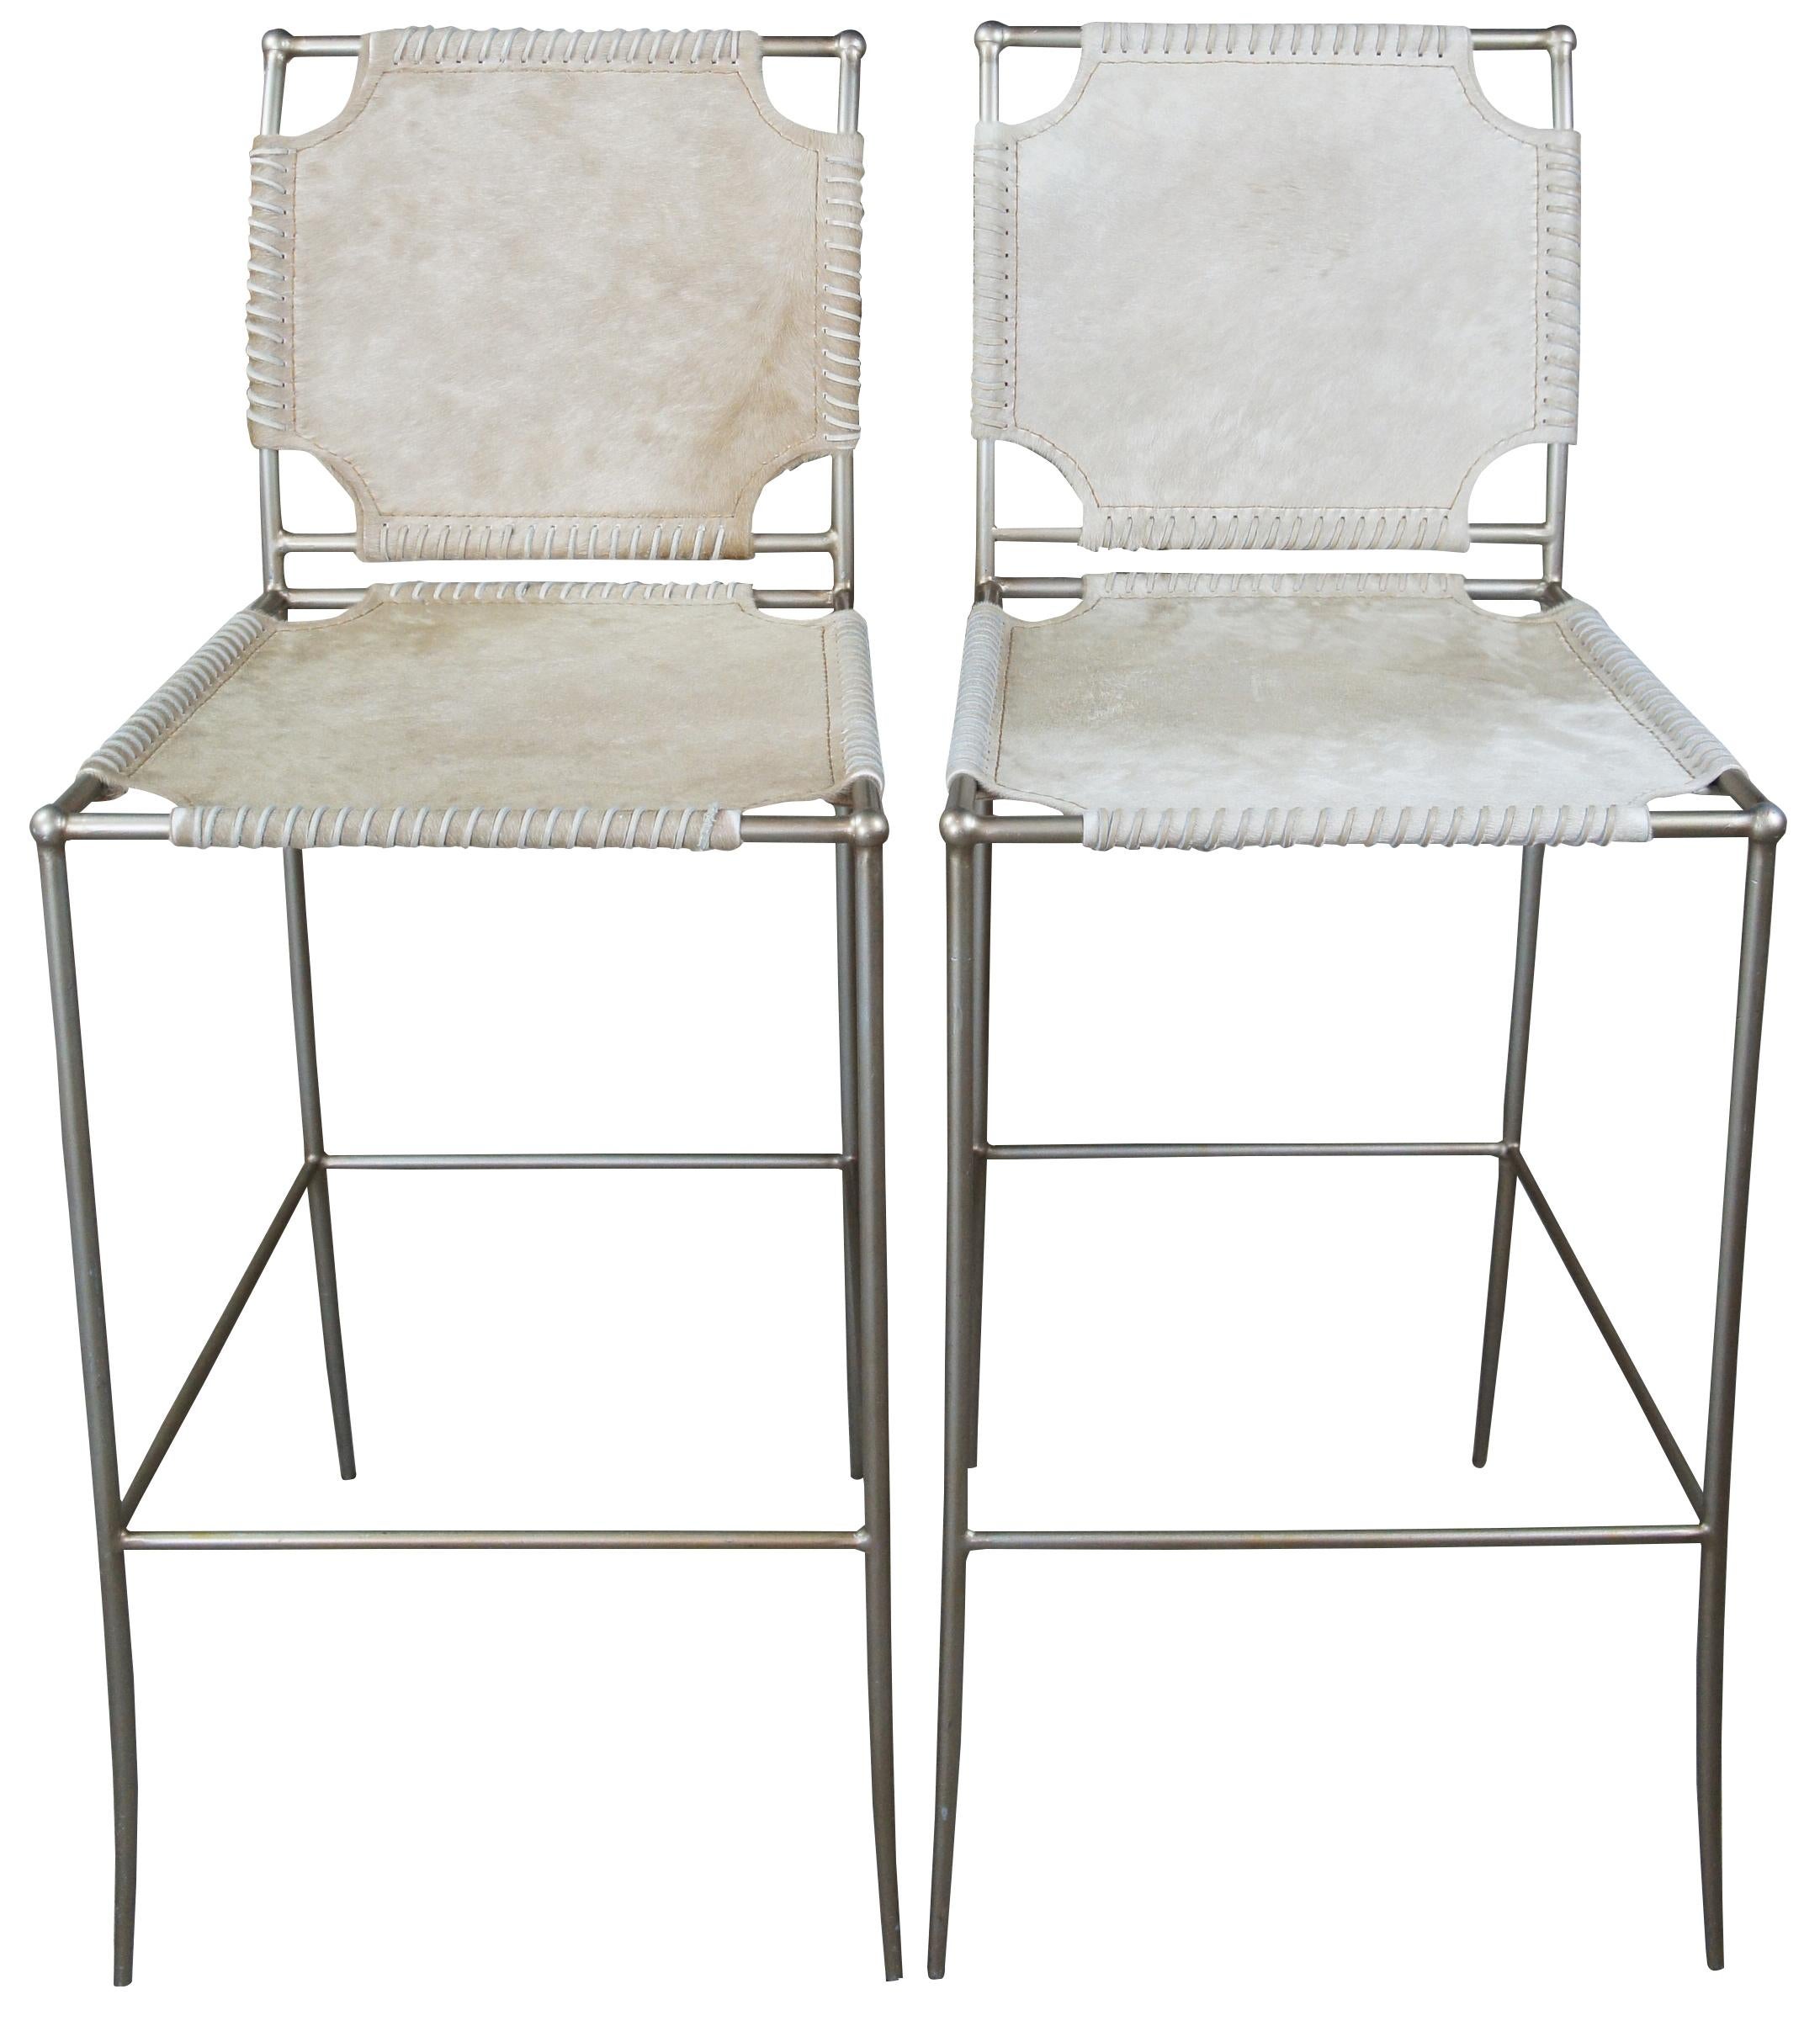 3 Caracole in stitches bar stools, ATS-BARSTL-001. Part of their modern artisan line. Features a streamline metal frame with leather wrapped seat and back.
  